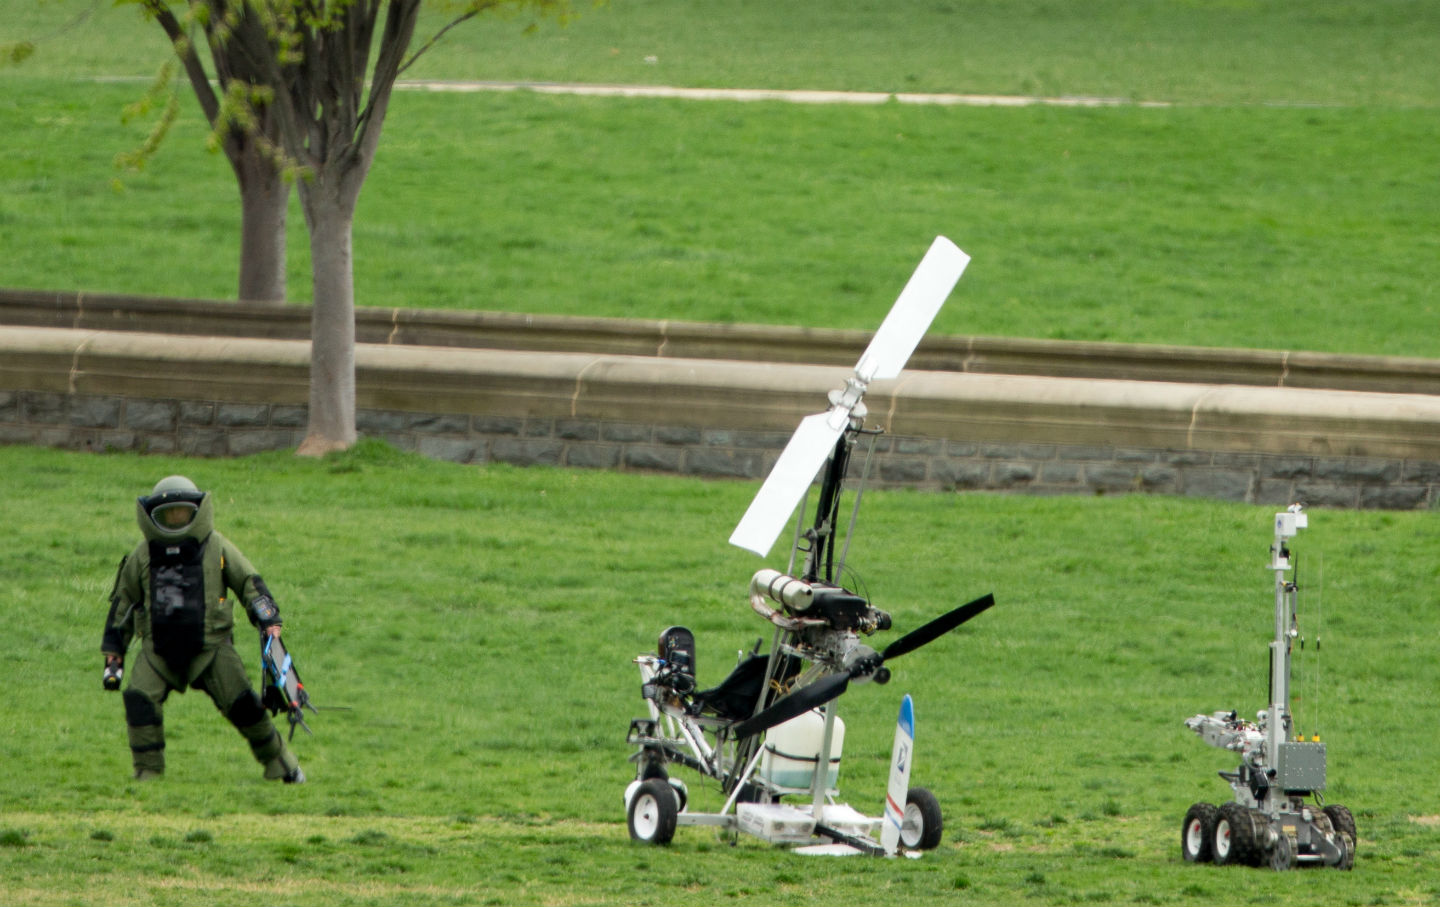 We Spend $600 Billion a Year on Defense, but Couldn’t Stop a Mailman From Landing His Gyrocopter on the Capitol Lawn